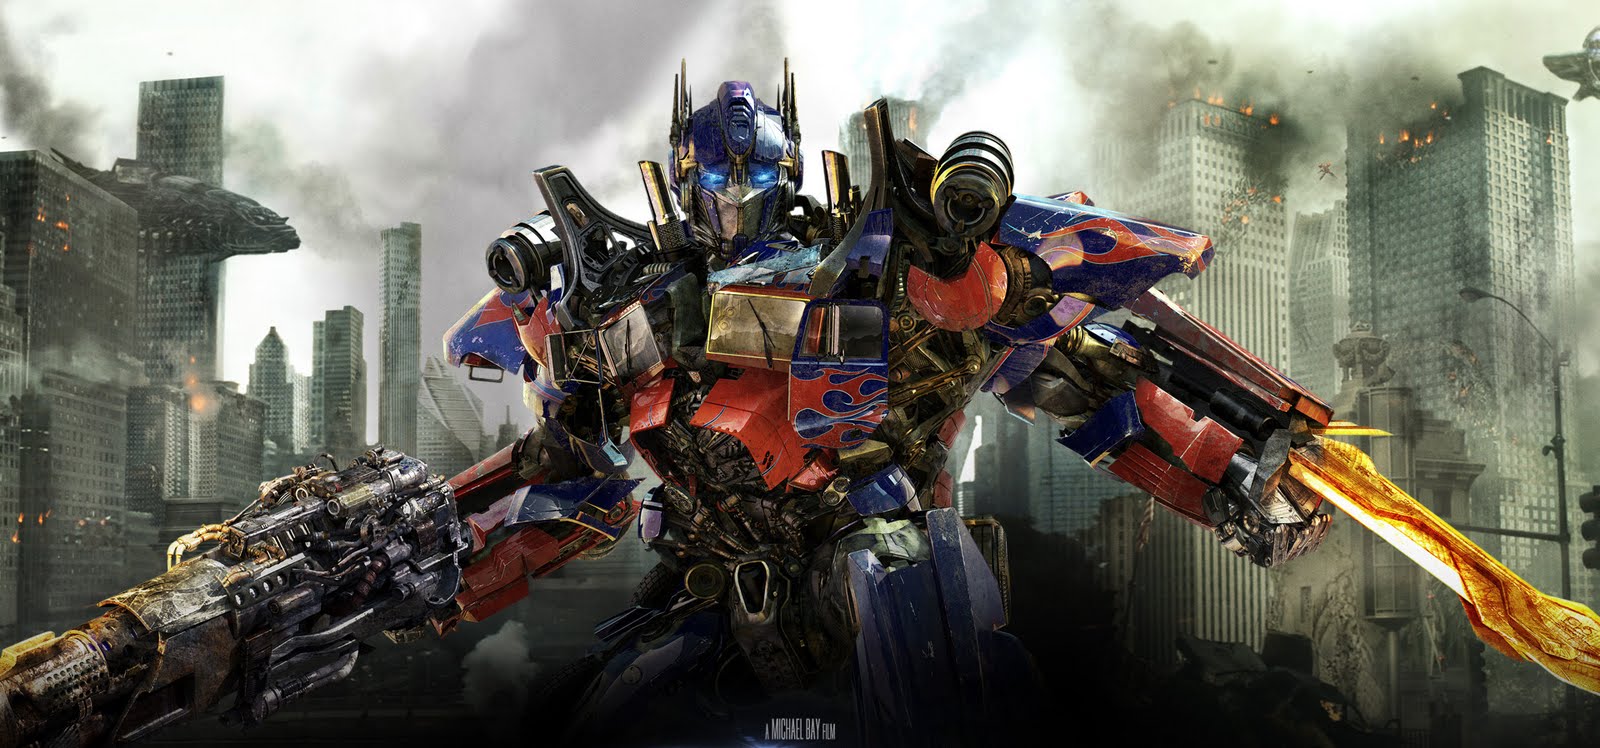 Transformers 3 Streaming